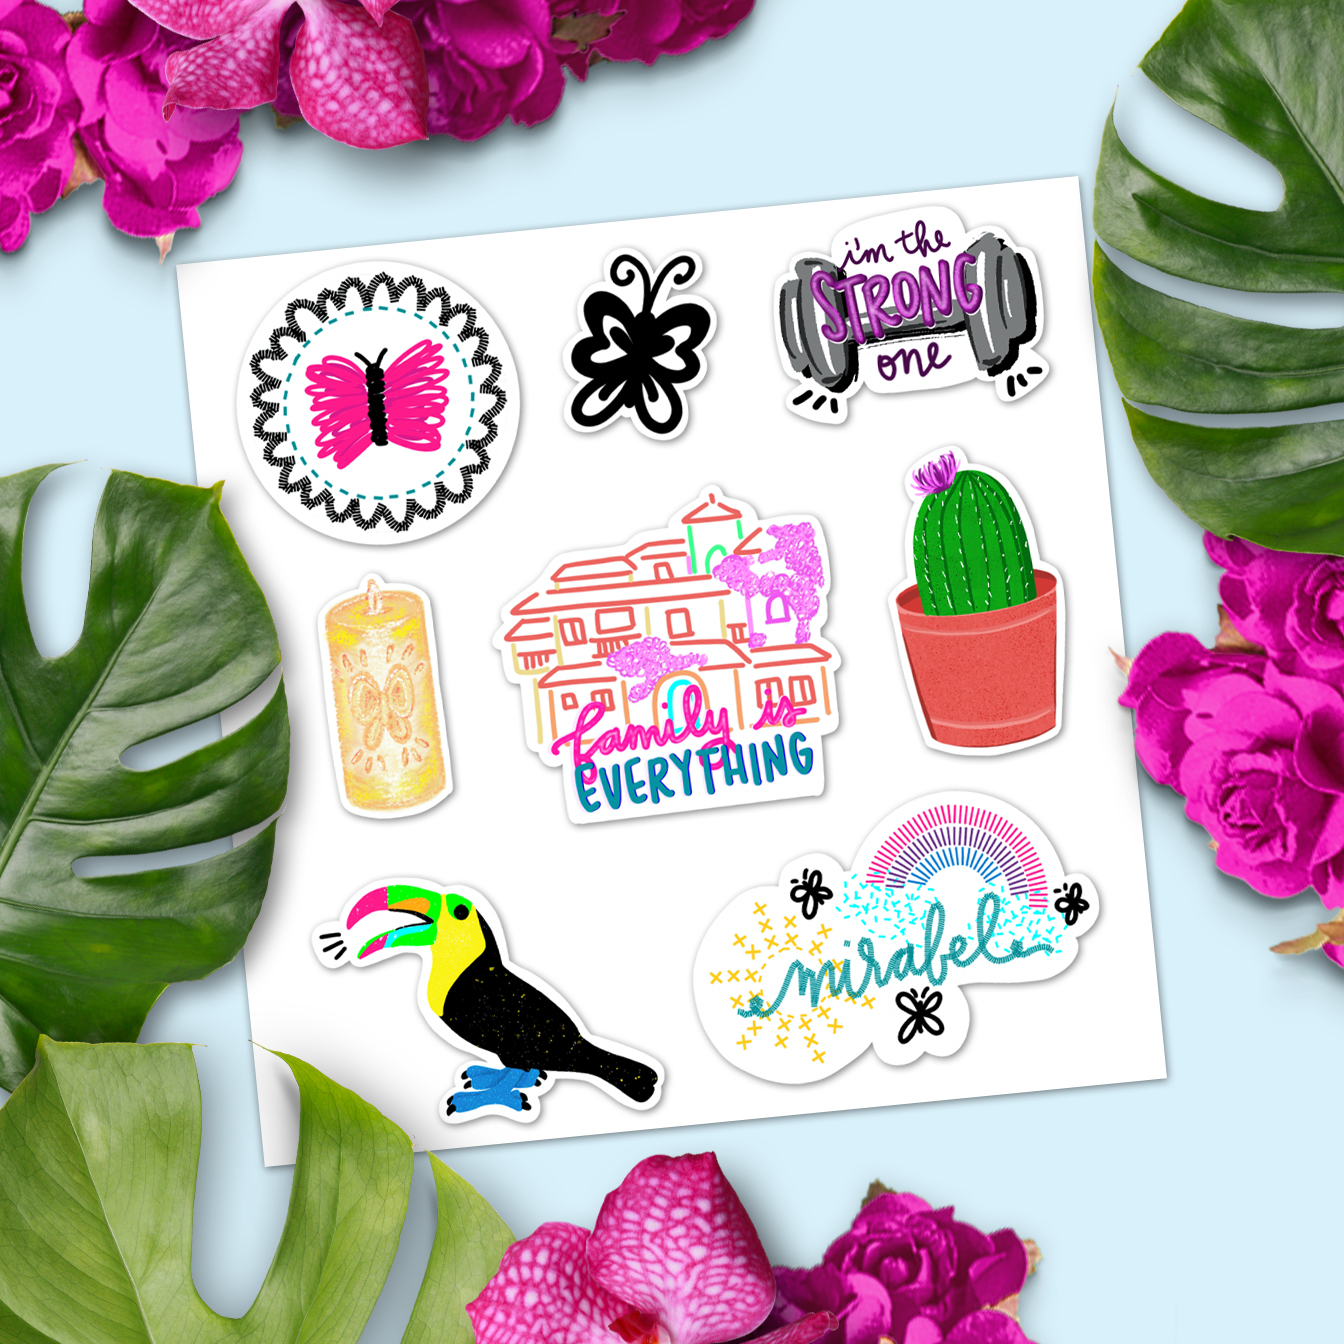 Free Encanto Stickers – Once Upon a Theme Park